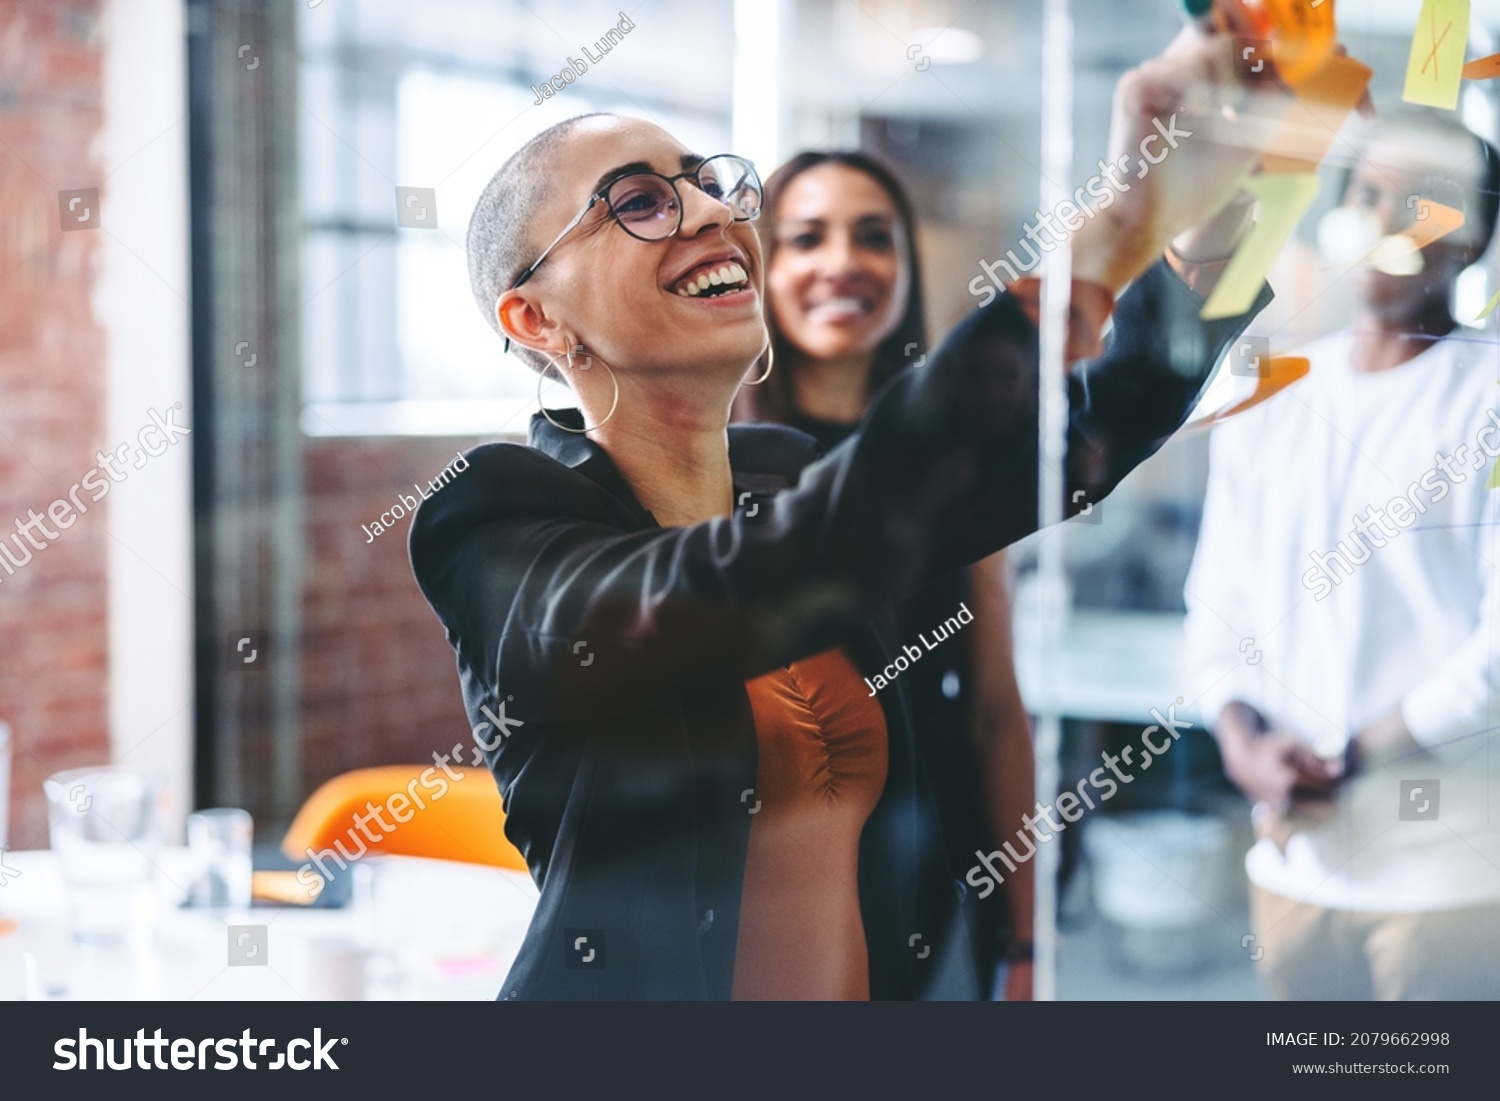 Smiling businesswoman sharing her ideas with her colleagues in a creative workplace. Confident young businesswoman sticking adhesive notes to a glass wall with her team standing in the background. #2079662998